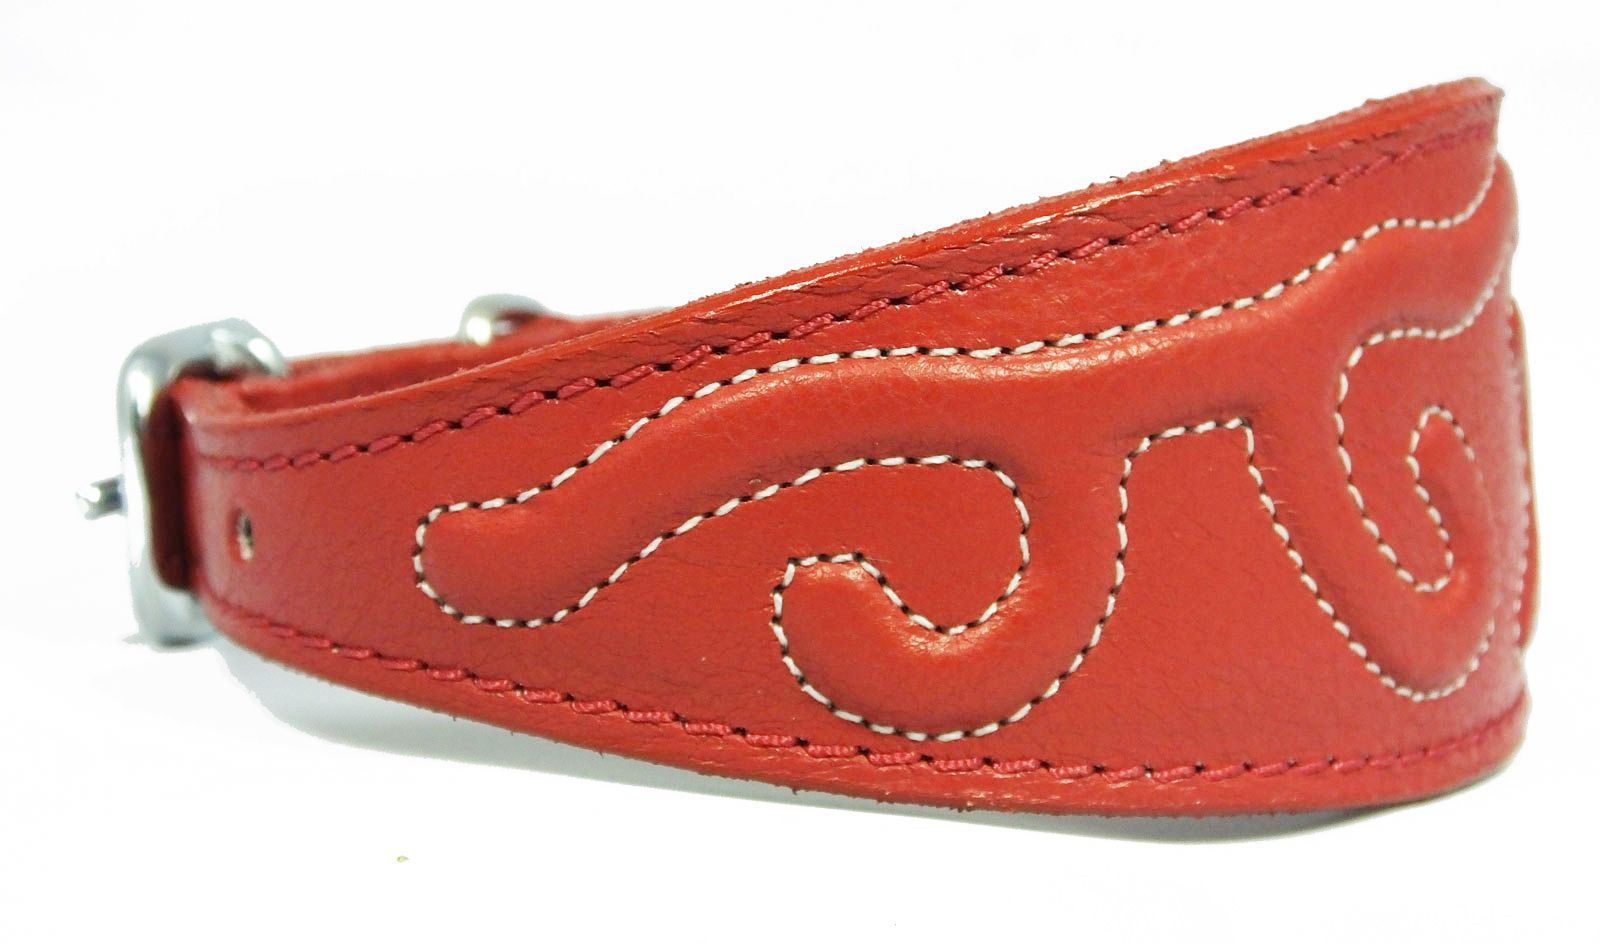 Sighthound Collar - Padded Leather With Stitch Design in Red